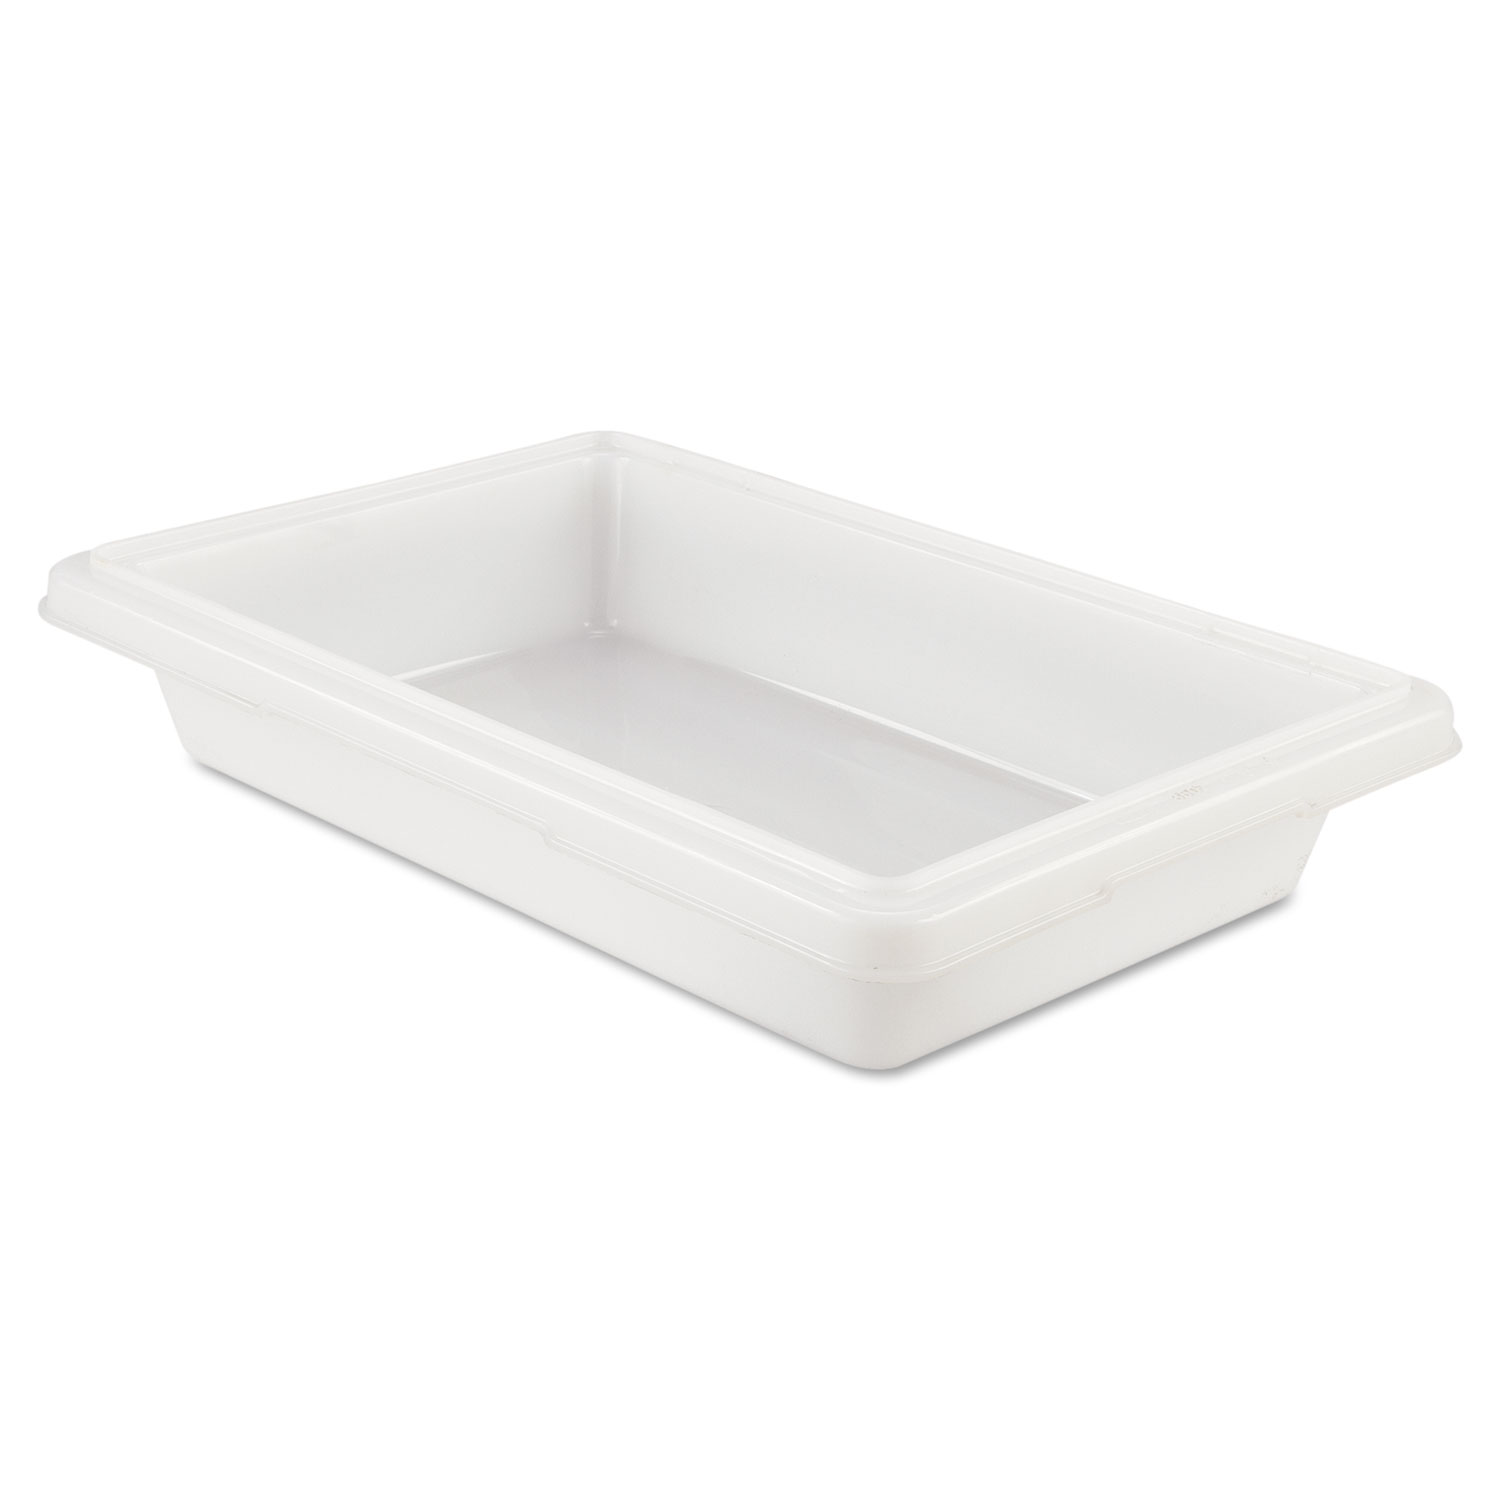  Rubbermaid Commercial FG350700WHT Food/Tote Boxes, 2gal, 18w x 12d x 3 1/2h, White (RCP3507WHI) 